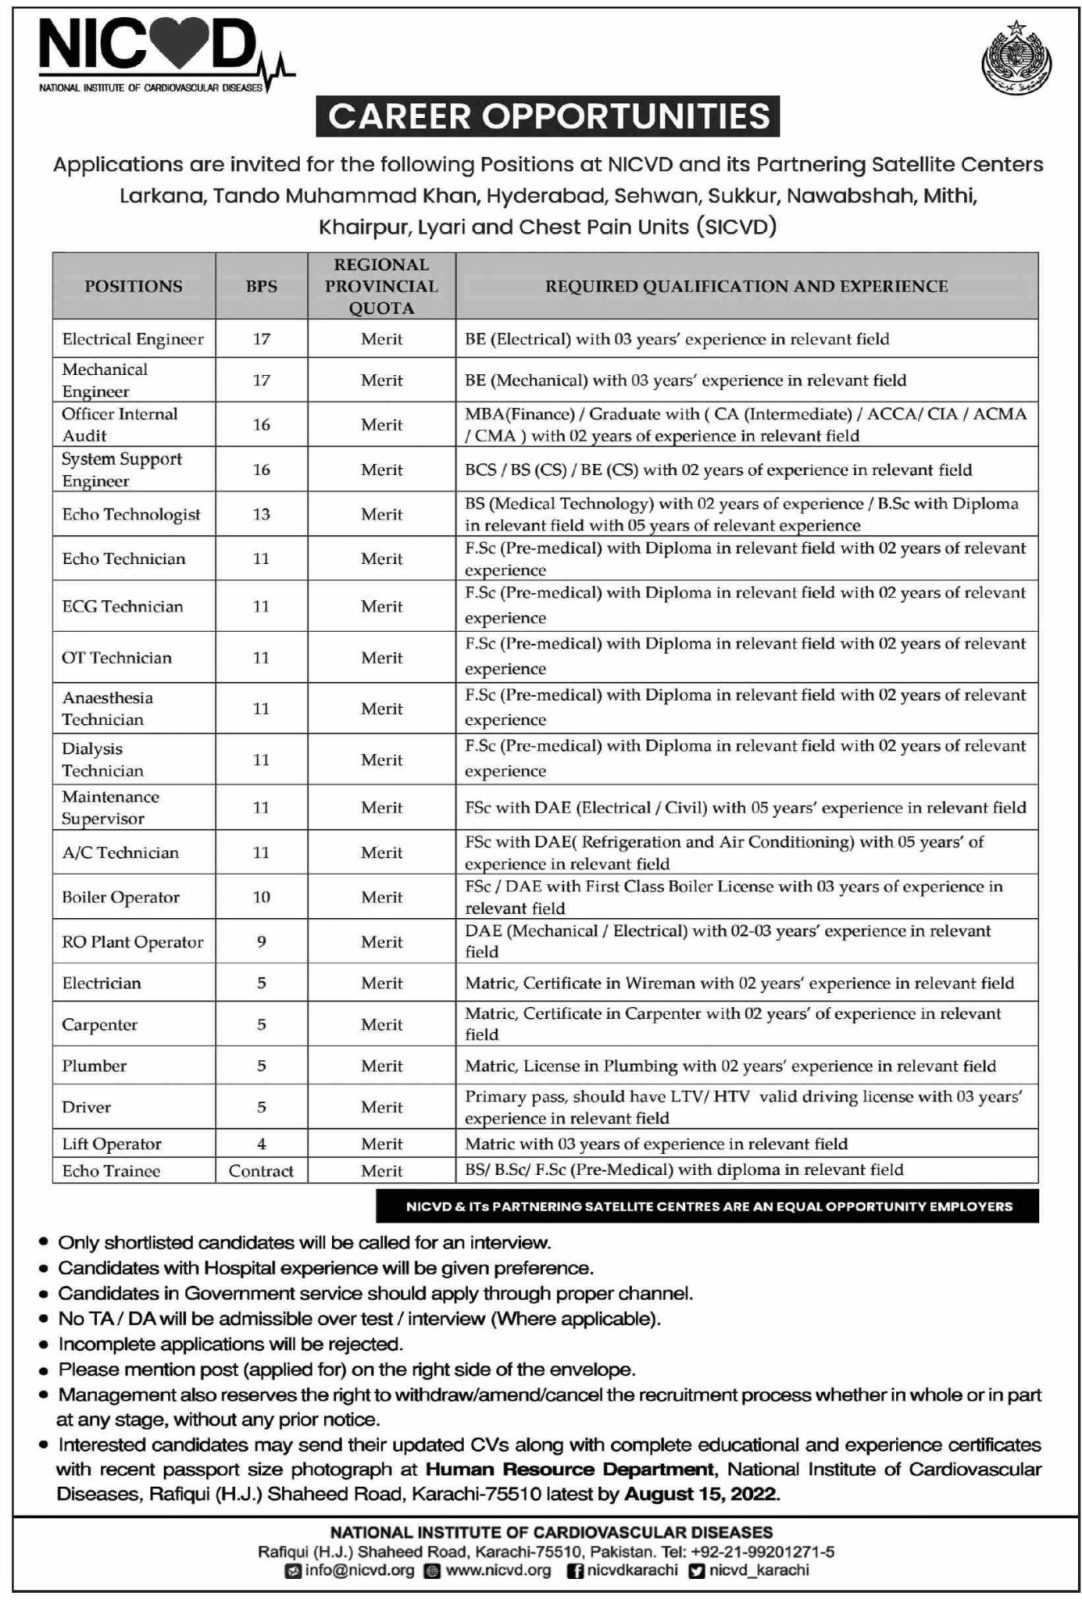 Career Opportunities at NICVD Sindh 2022